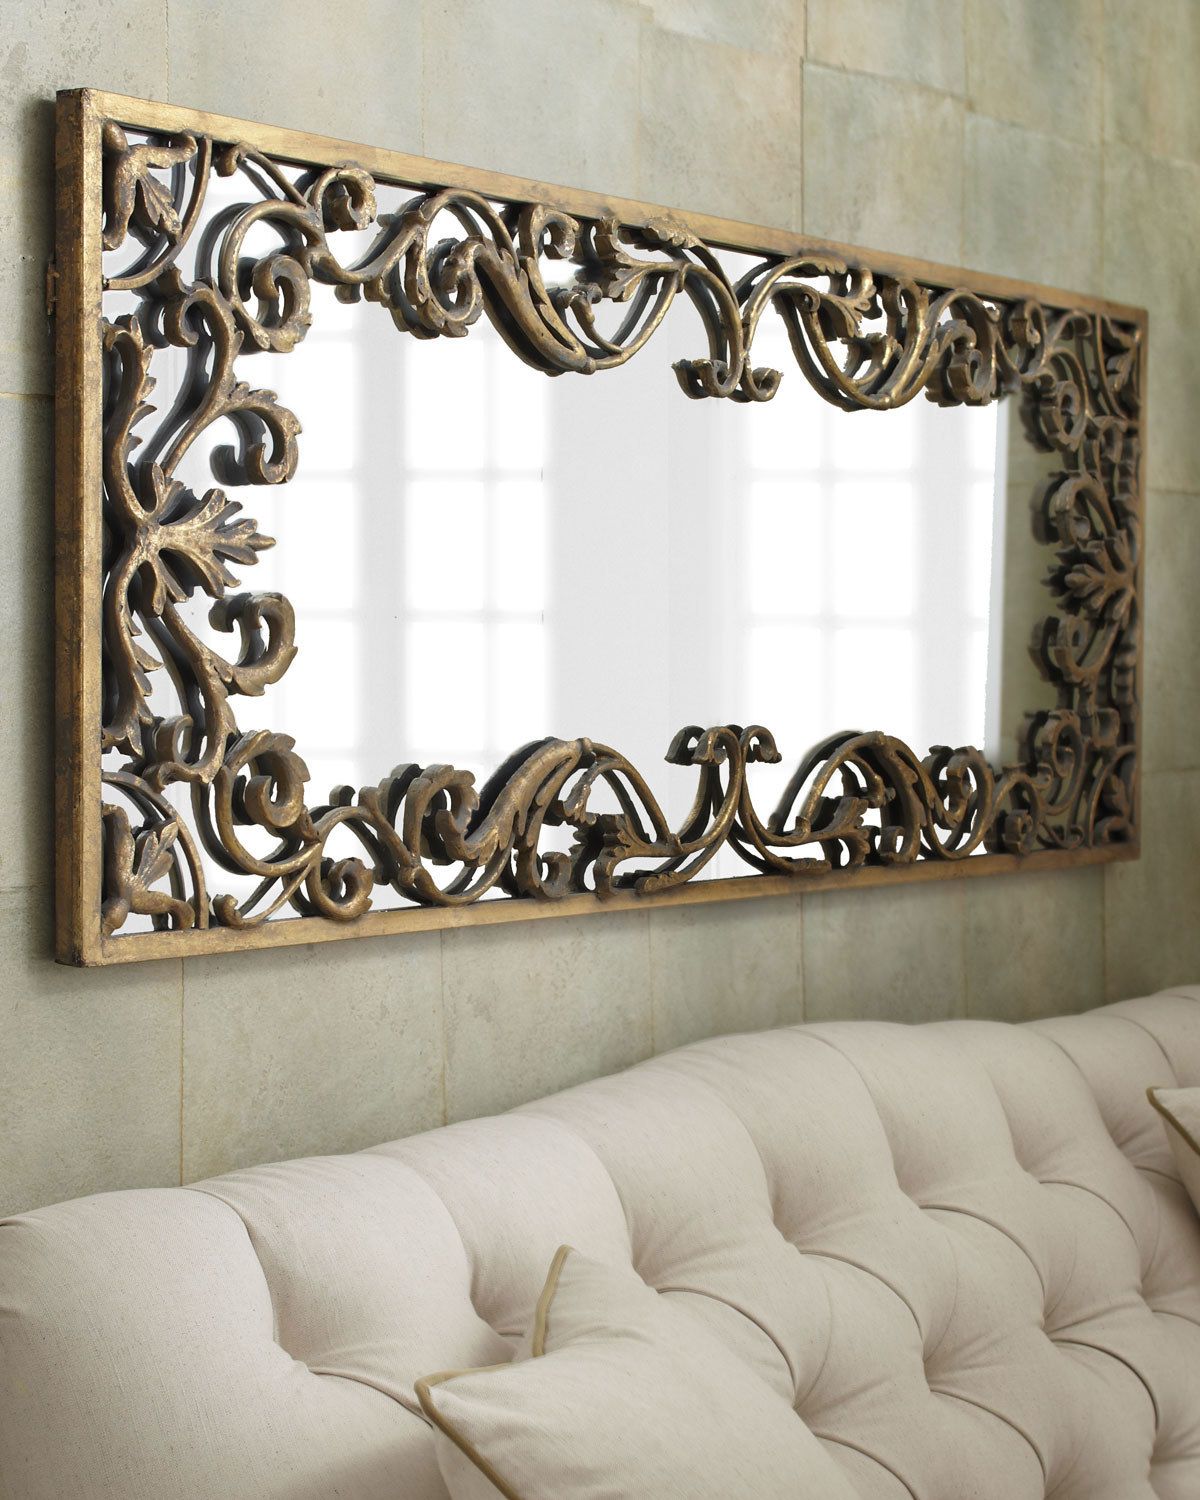 Fancy Wall Mirrors: Reflections Of Style And Elegance